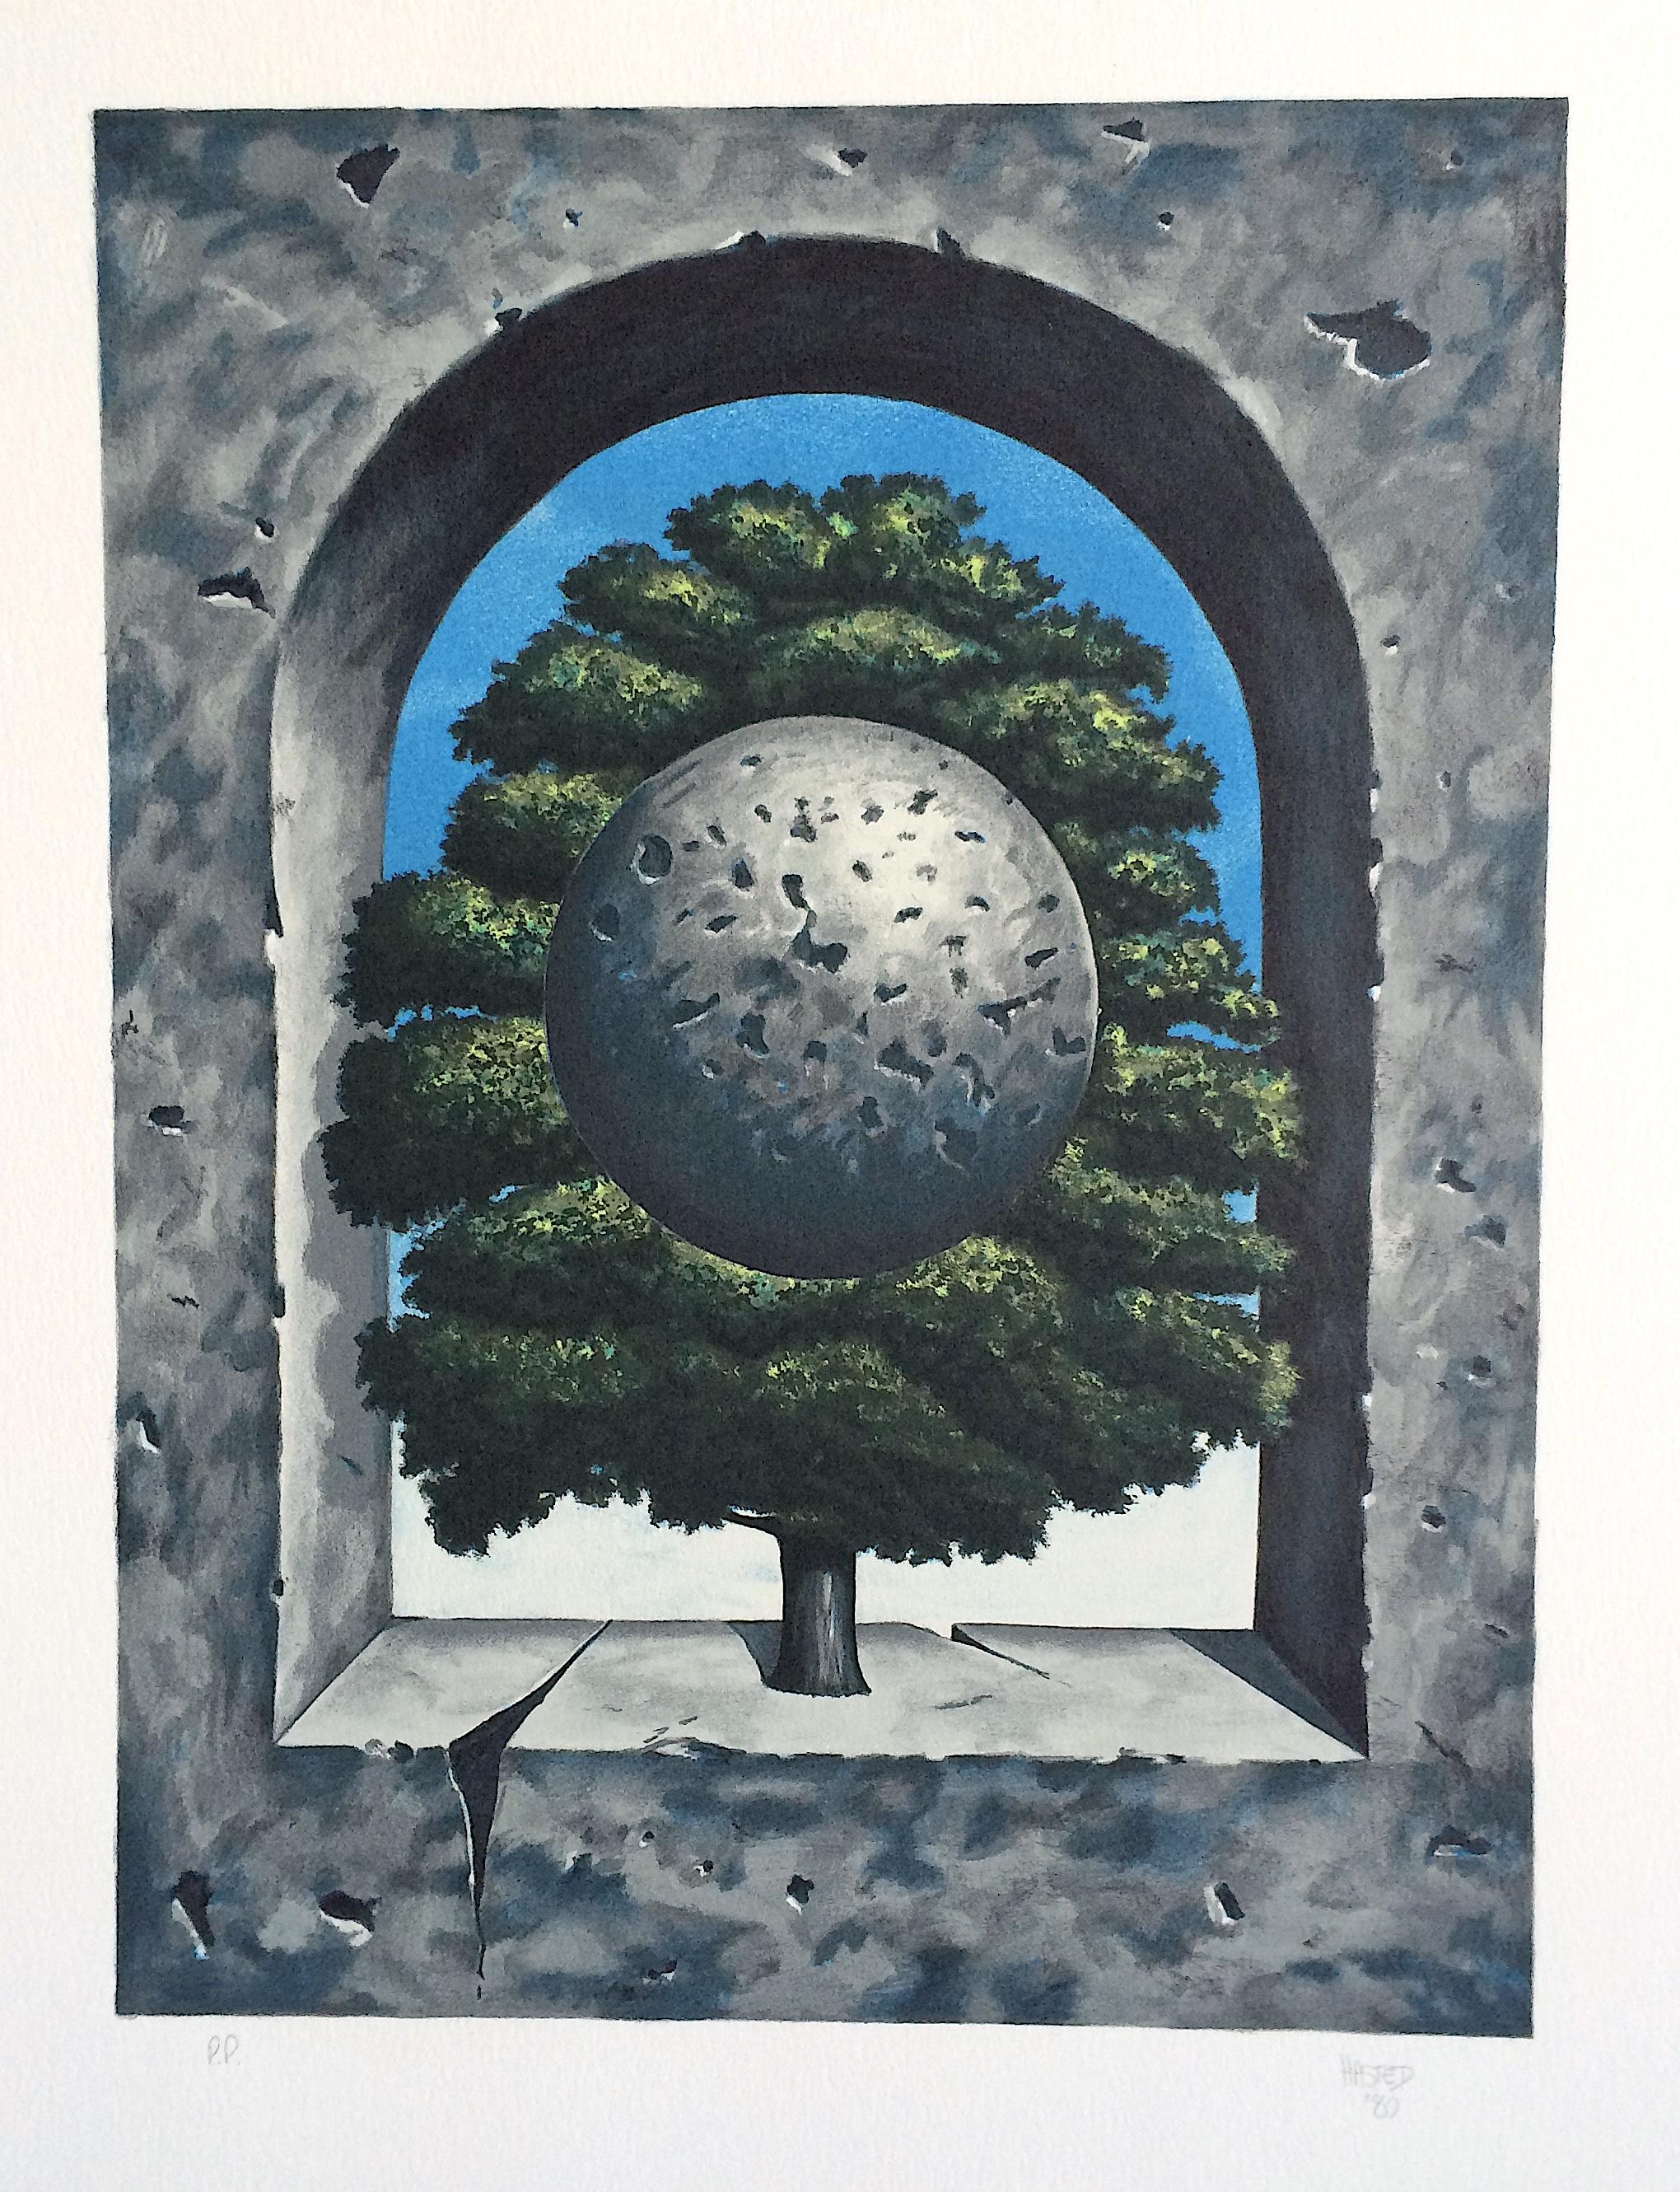 Michael Hasted Landscape Print - A POINT OF HONOR Hand Drawn Lithograph, Surrealist Tree, Blue Sky, Concrete Arch